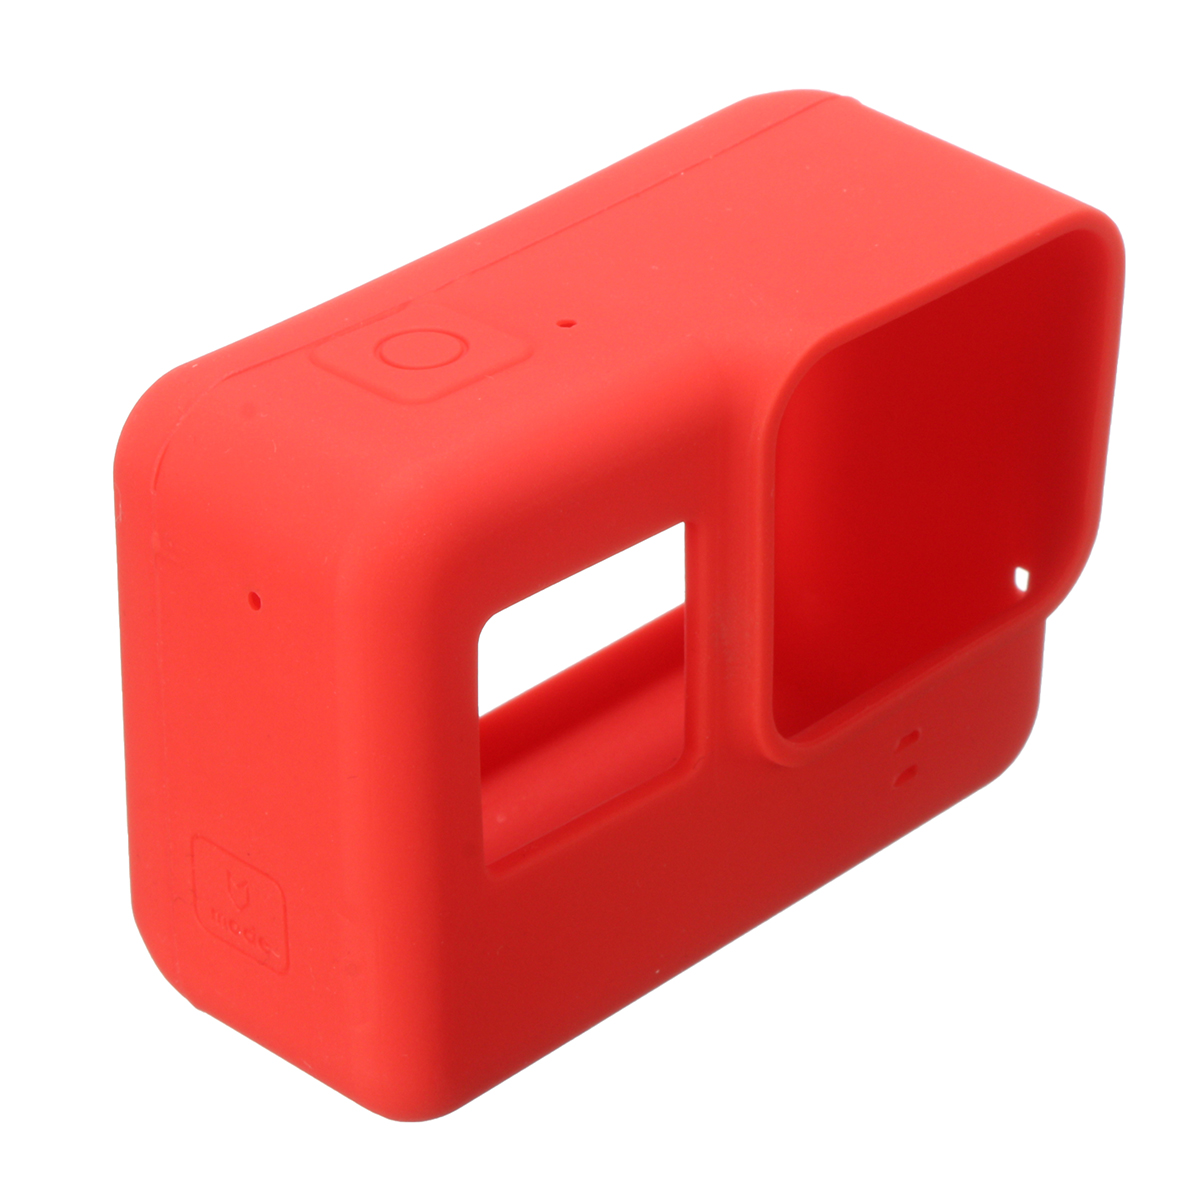 Soft-Silicone-Housing-Case-Protective-Cover-And-Lens-Cap-For-GoPro-Hero-5-Camera-1109058-7